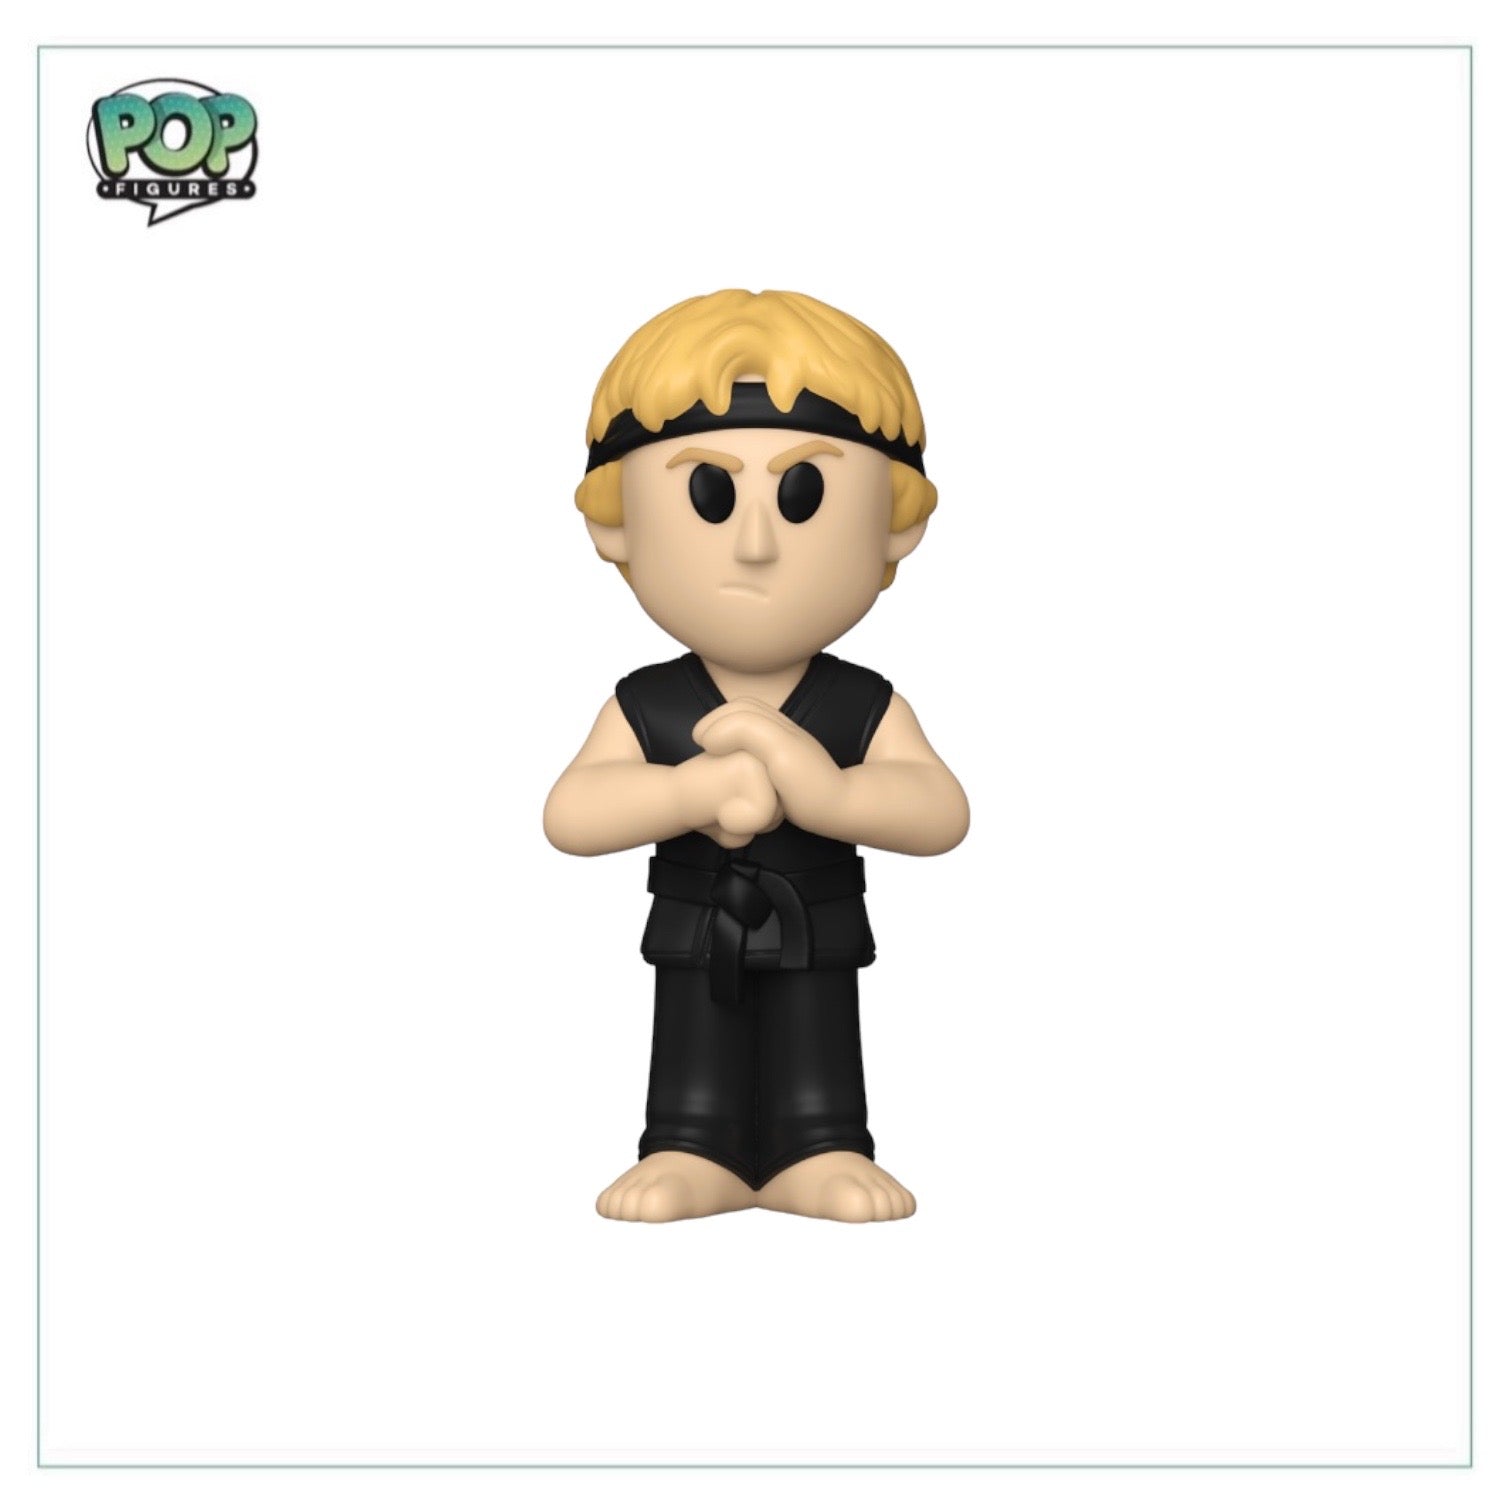 Johnny Lawrence Funko Soda Vinyl Figure! - Cobra Kai - SDCC 2023 Shared Exclusive LE8500 Pcs - Chance of Chase